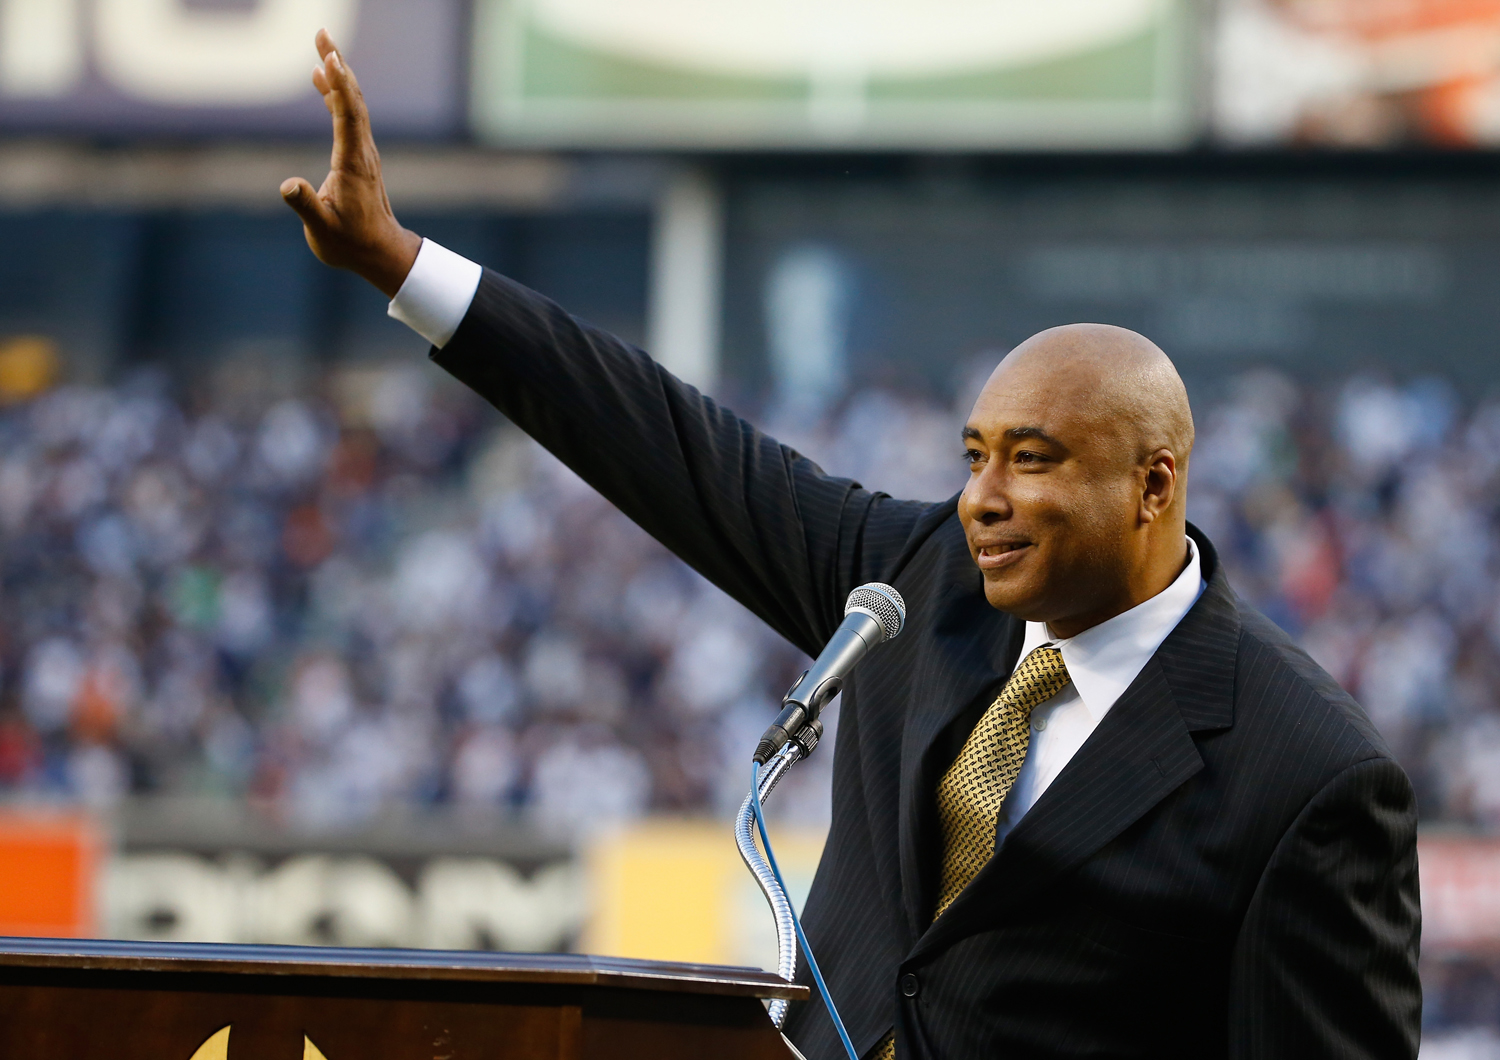 Bernie Williams waves to the crowd during the ceremony to retire his number in Monument Park before the game against the Texas Rangers at Yankee Stadium on May 24, 2015 in New York City. (Al Bello — Getty Images)